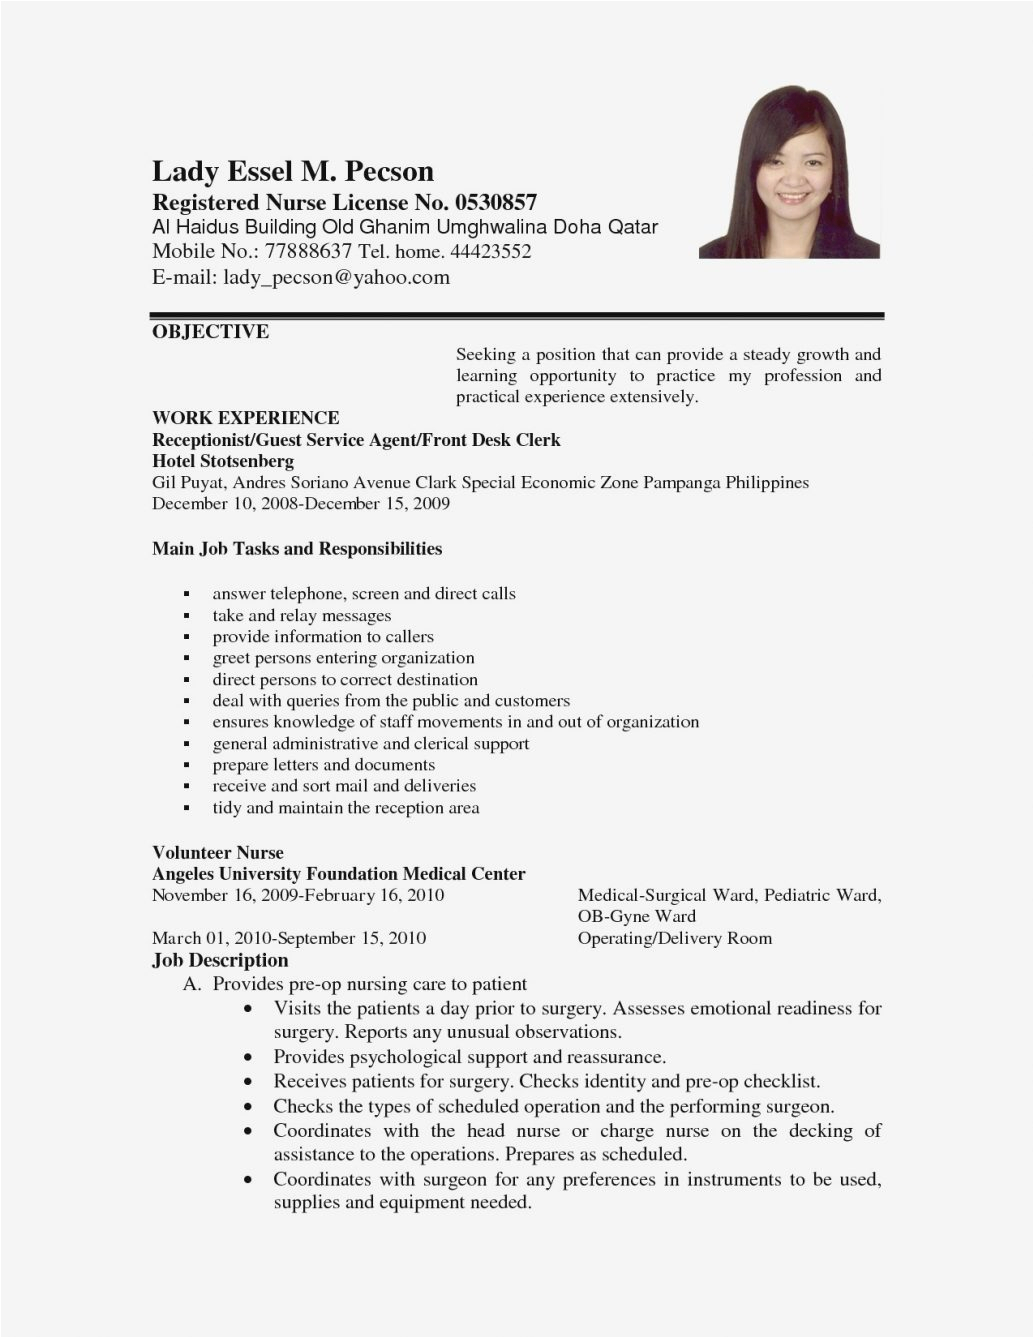 Sample Resume Objectives for On the Job Training Objective for Resume Job Objective In Resumes Simple for